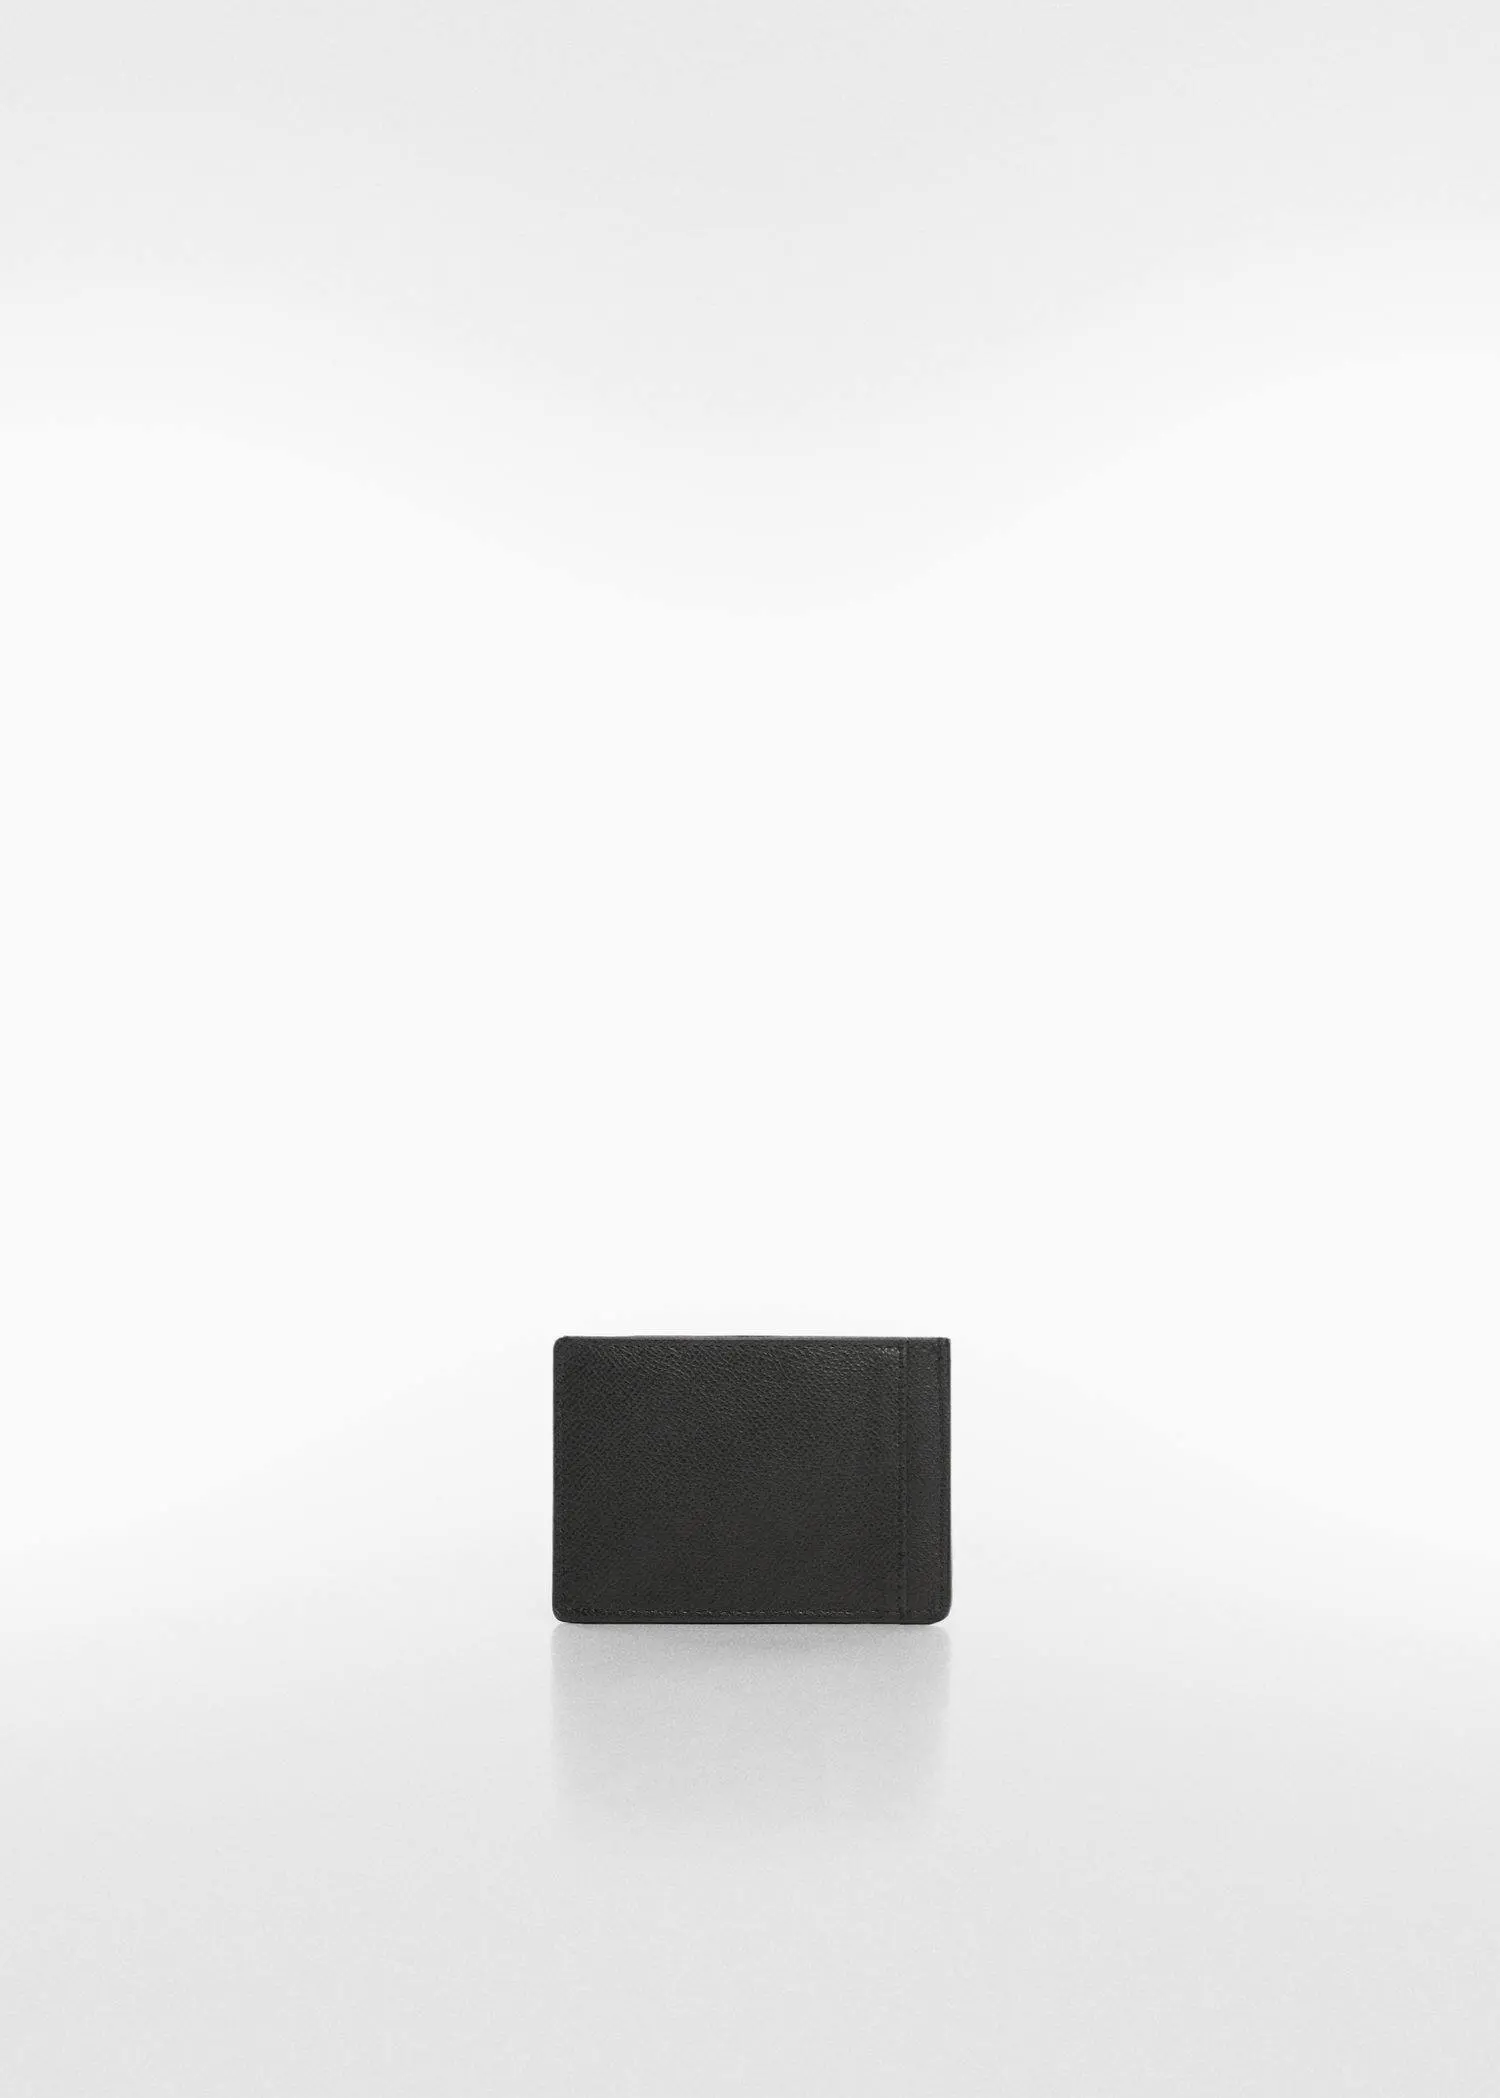 Mango Anti-contactless peaked card holder. 3